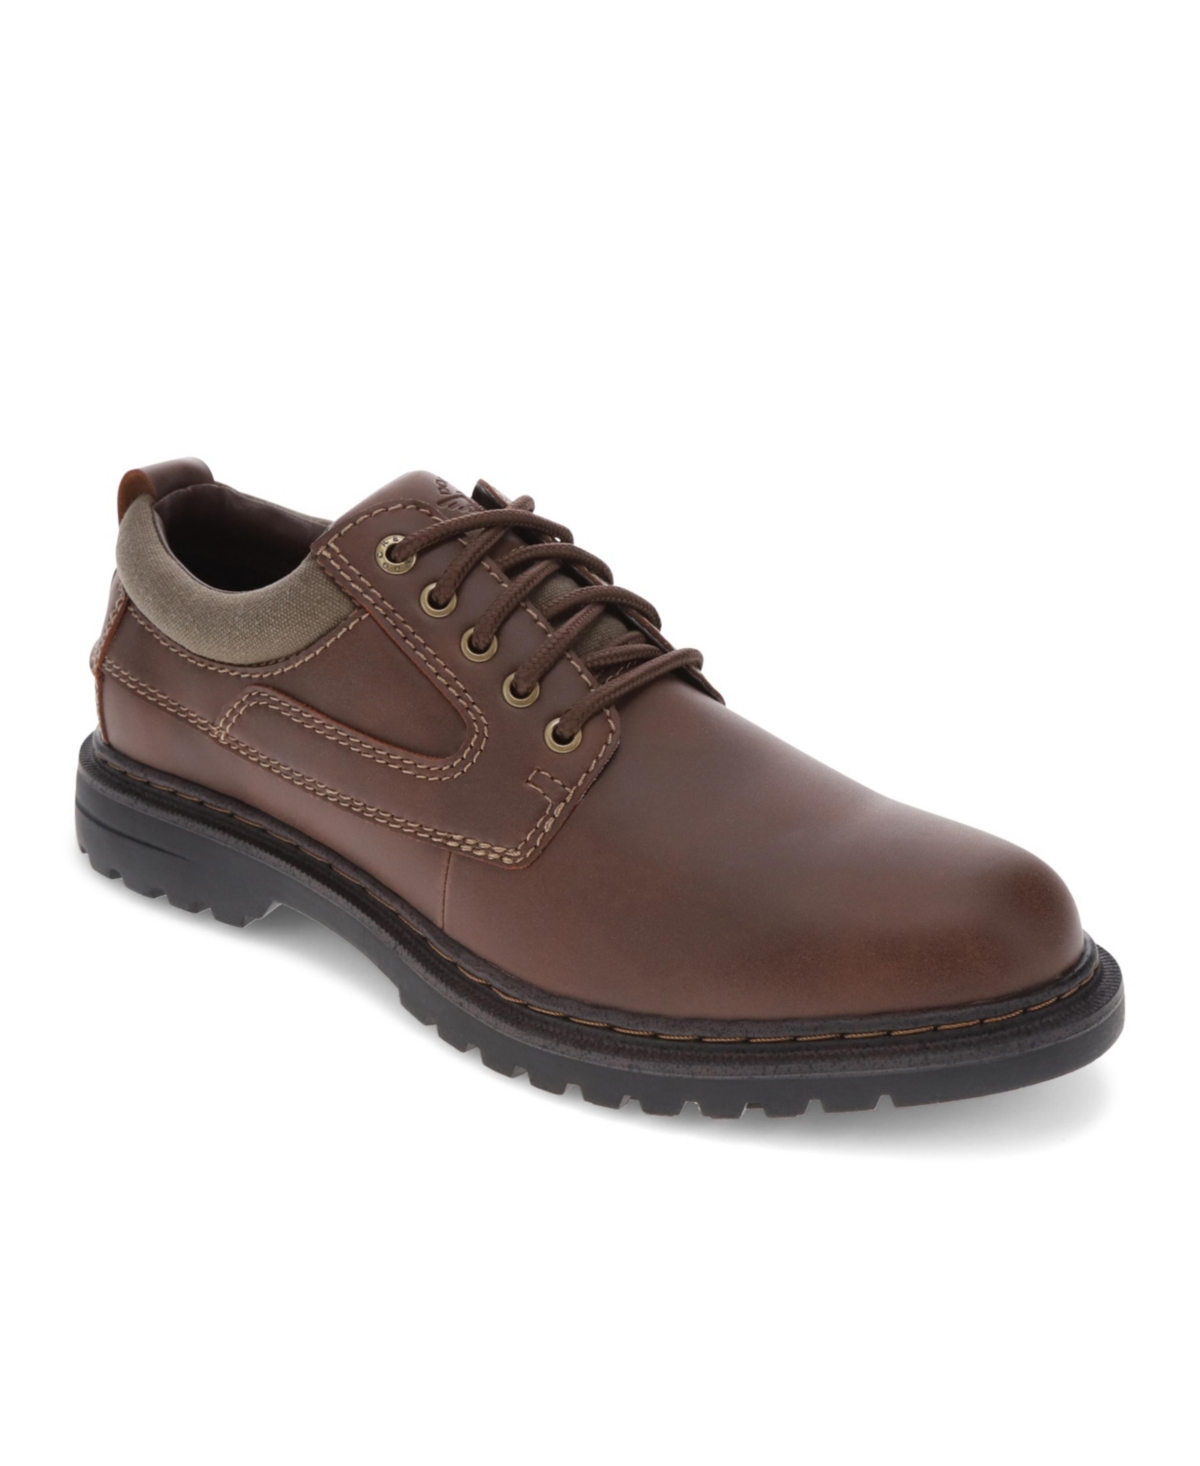 Men's Rugby Comfort Shoes - Briar